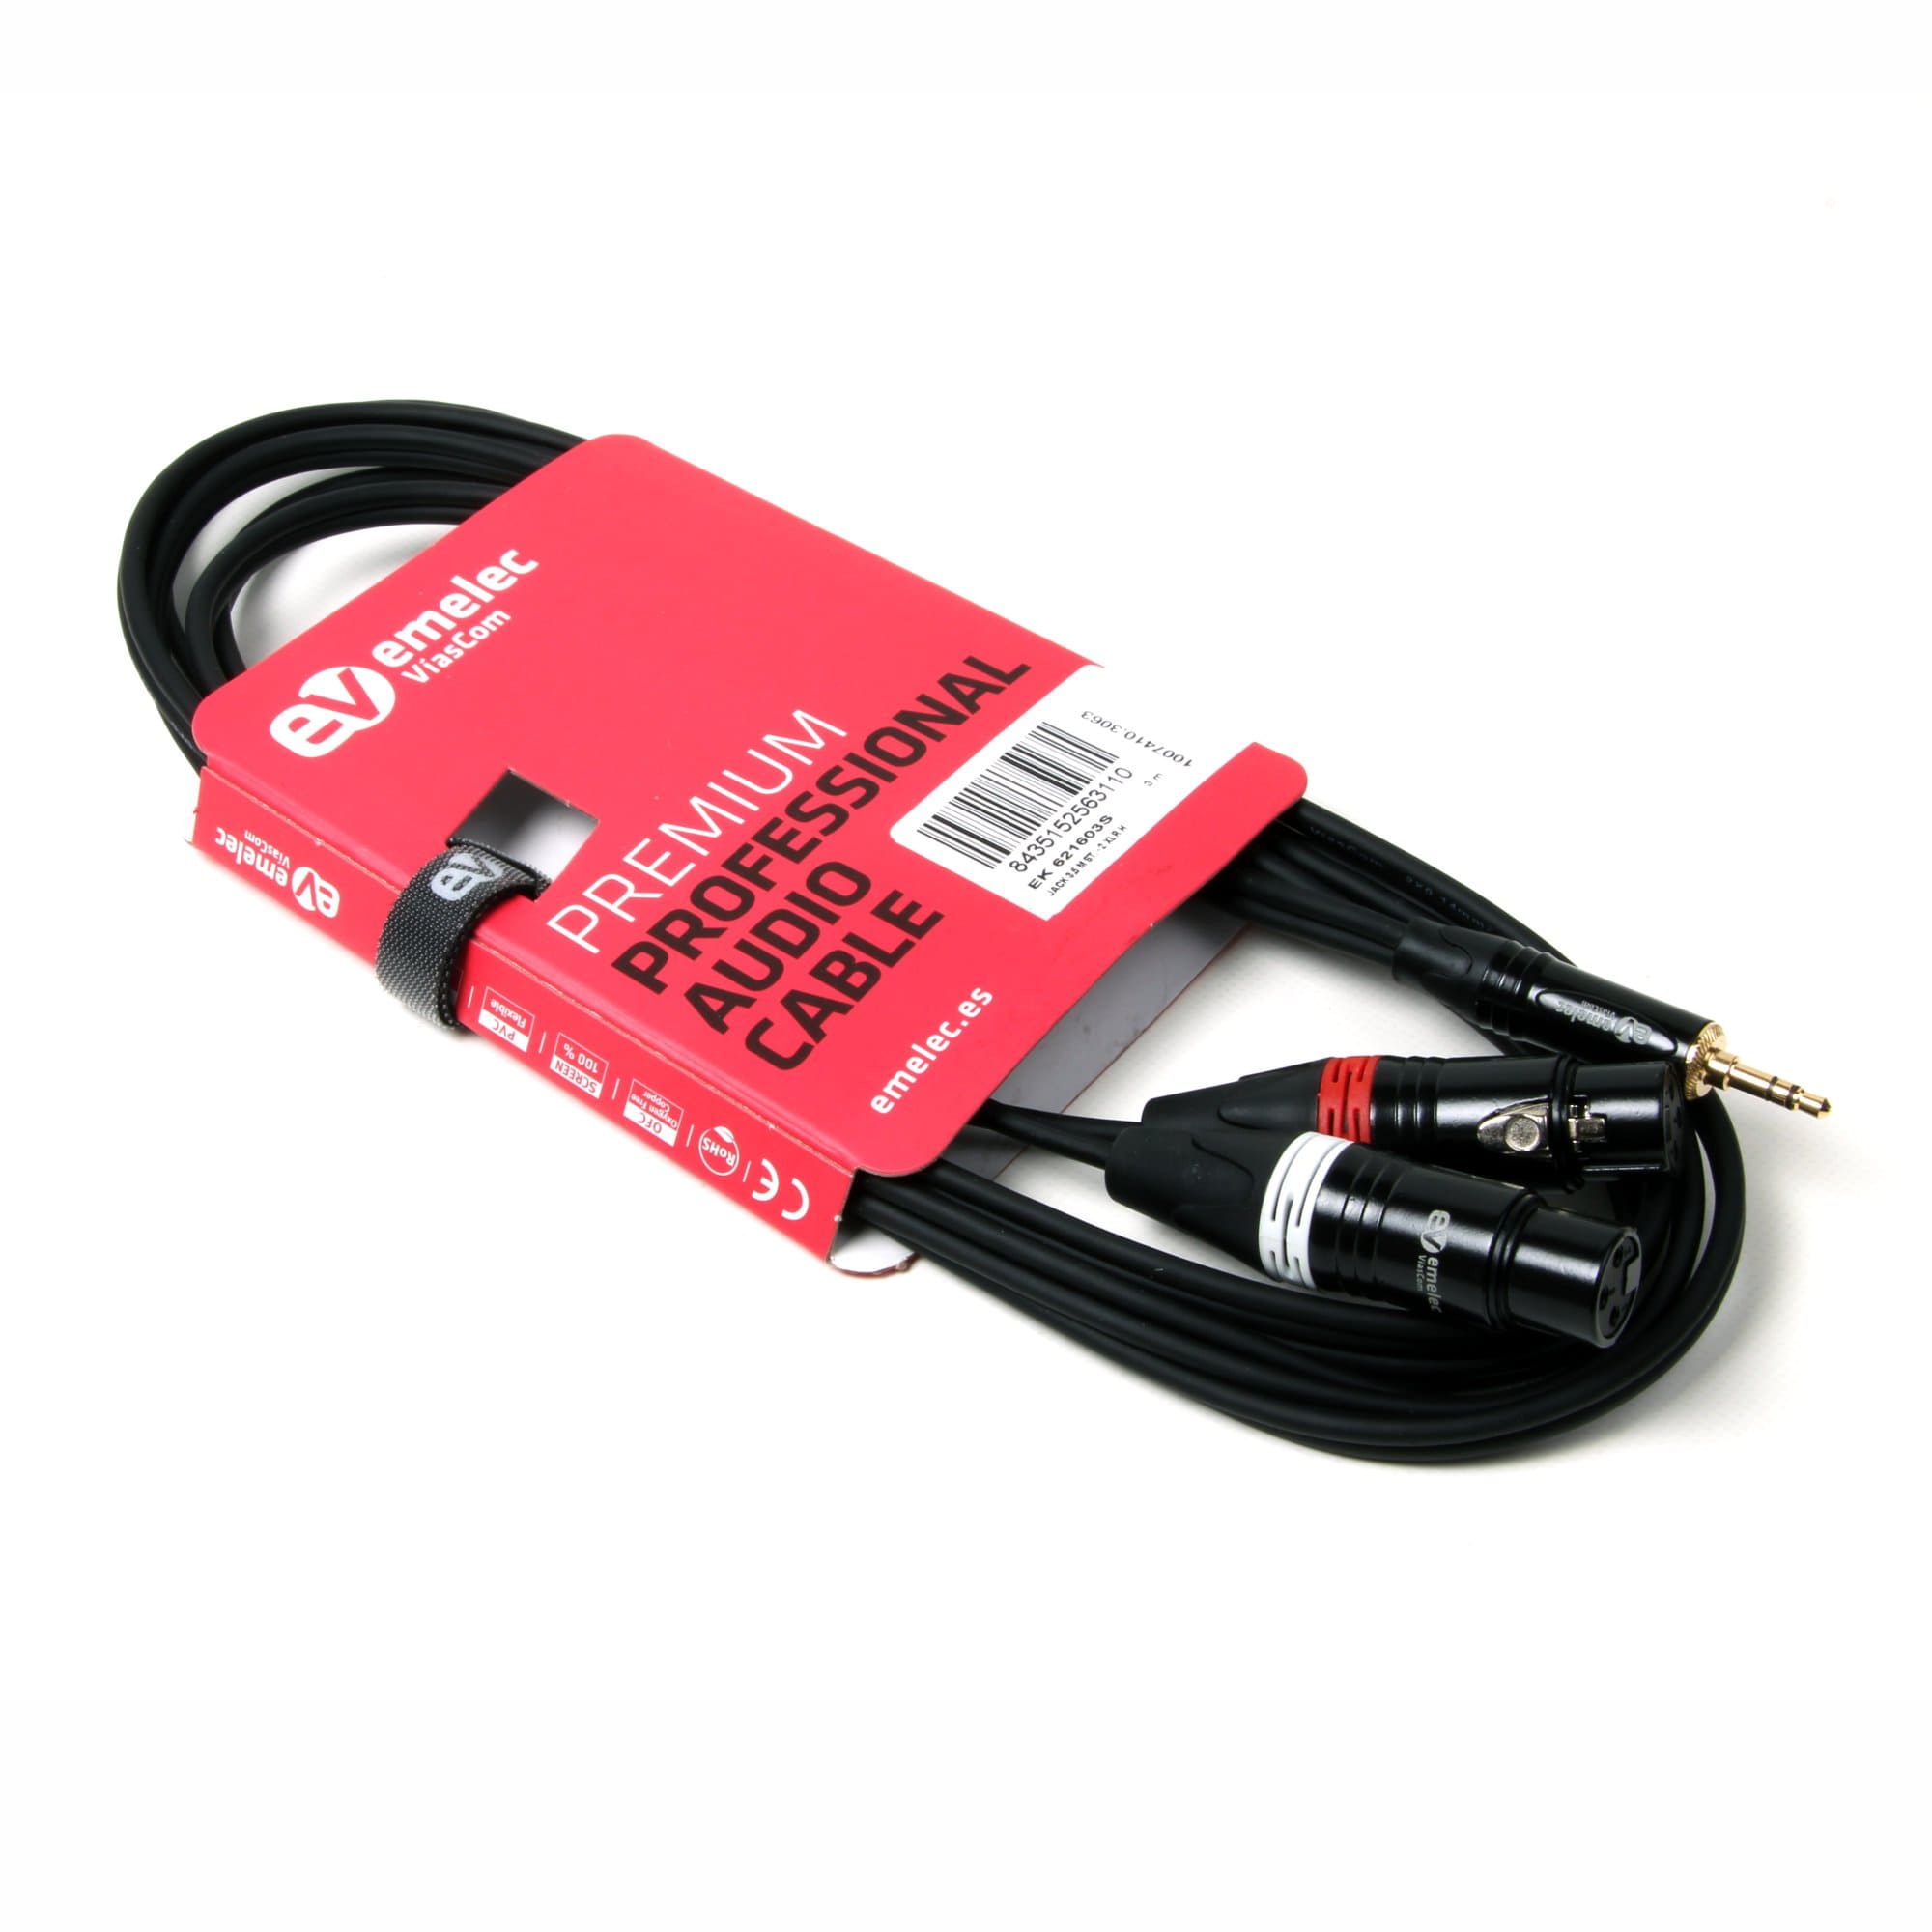 Microphonic Cable Strip Mounted with 2 XLR Female and Jack 3,5 Male stereo Emelec VíasCom EK621603S